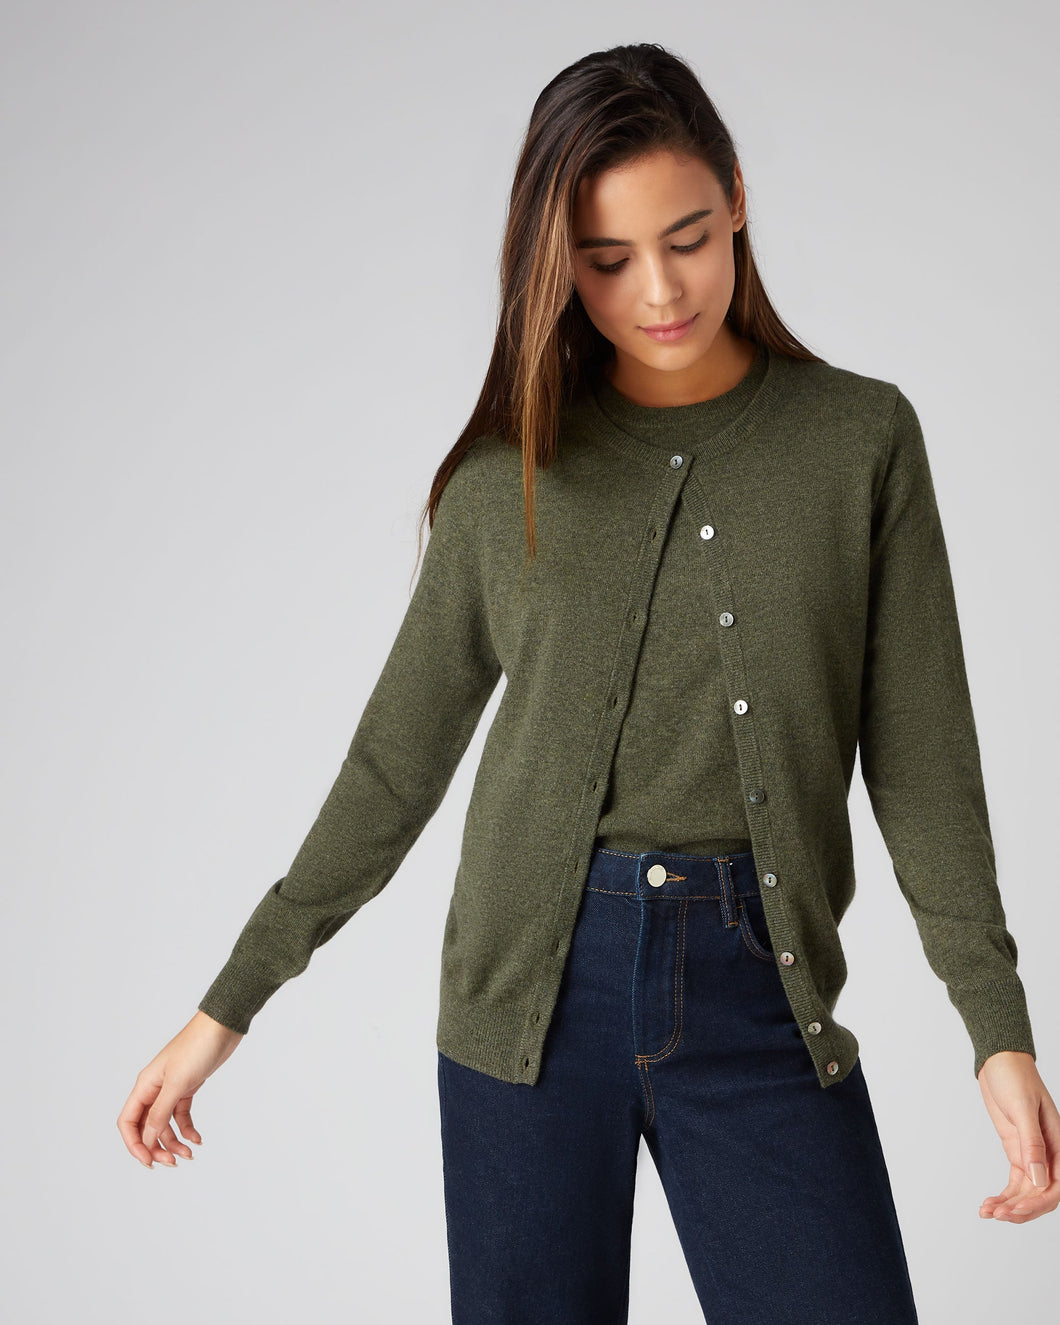 N.Peal Women's Round Neck Cashmere Cardigan Moss Green